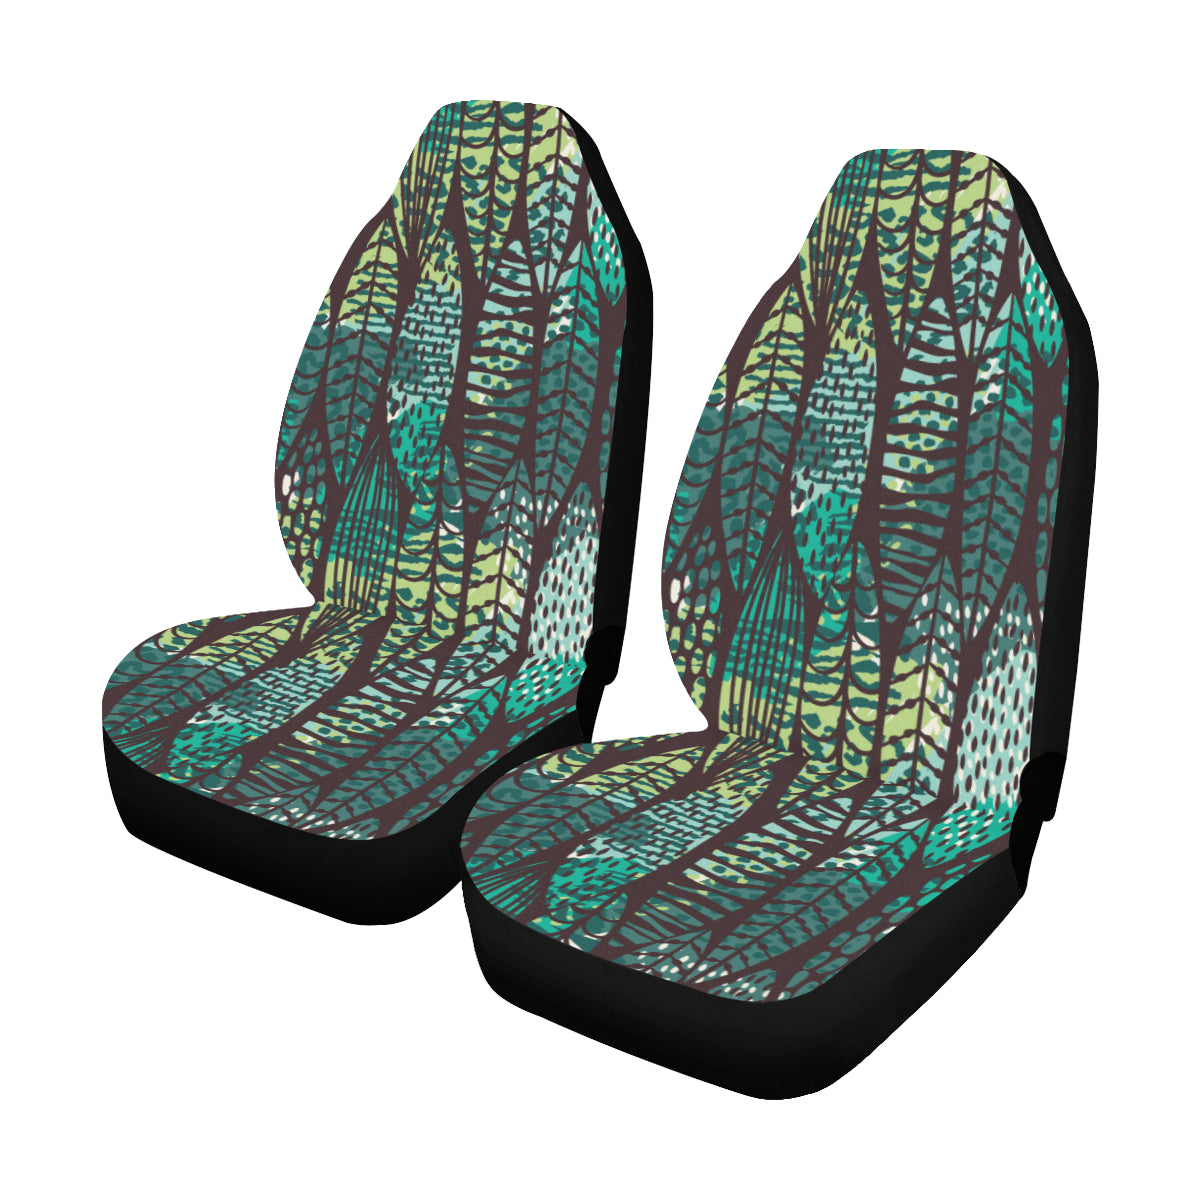 Surf Surfing Car Seat Covers 2 pc, Leaf Aztec Tribal Indian Pattern Bohemian Art Front Seat Covers, Car SUV Seat Protector Accessory Decor Starcove Fashion